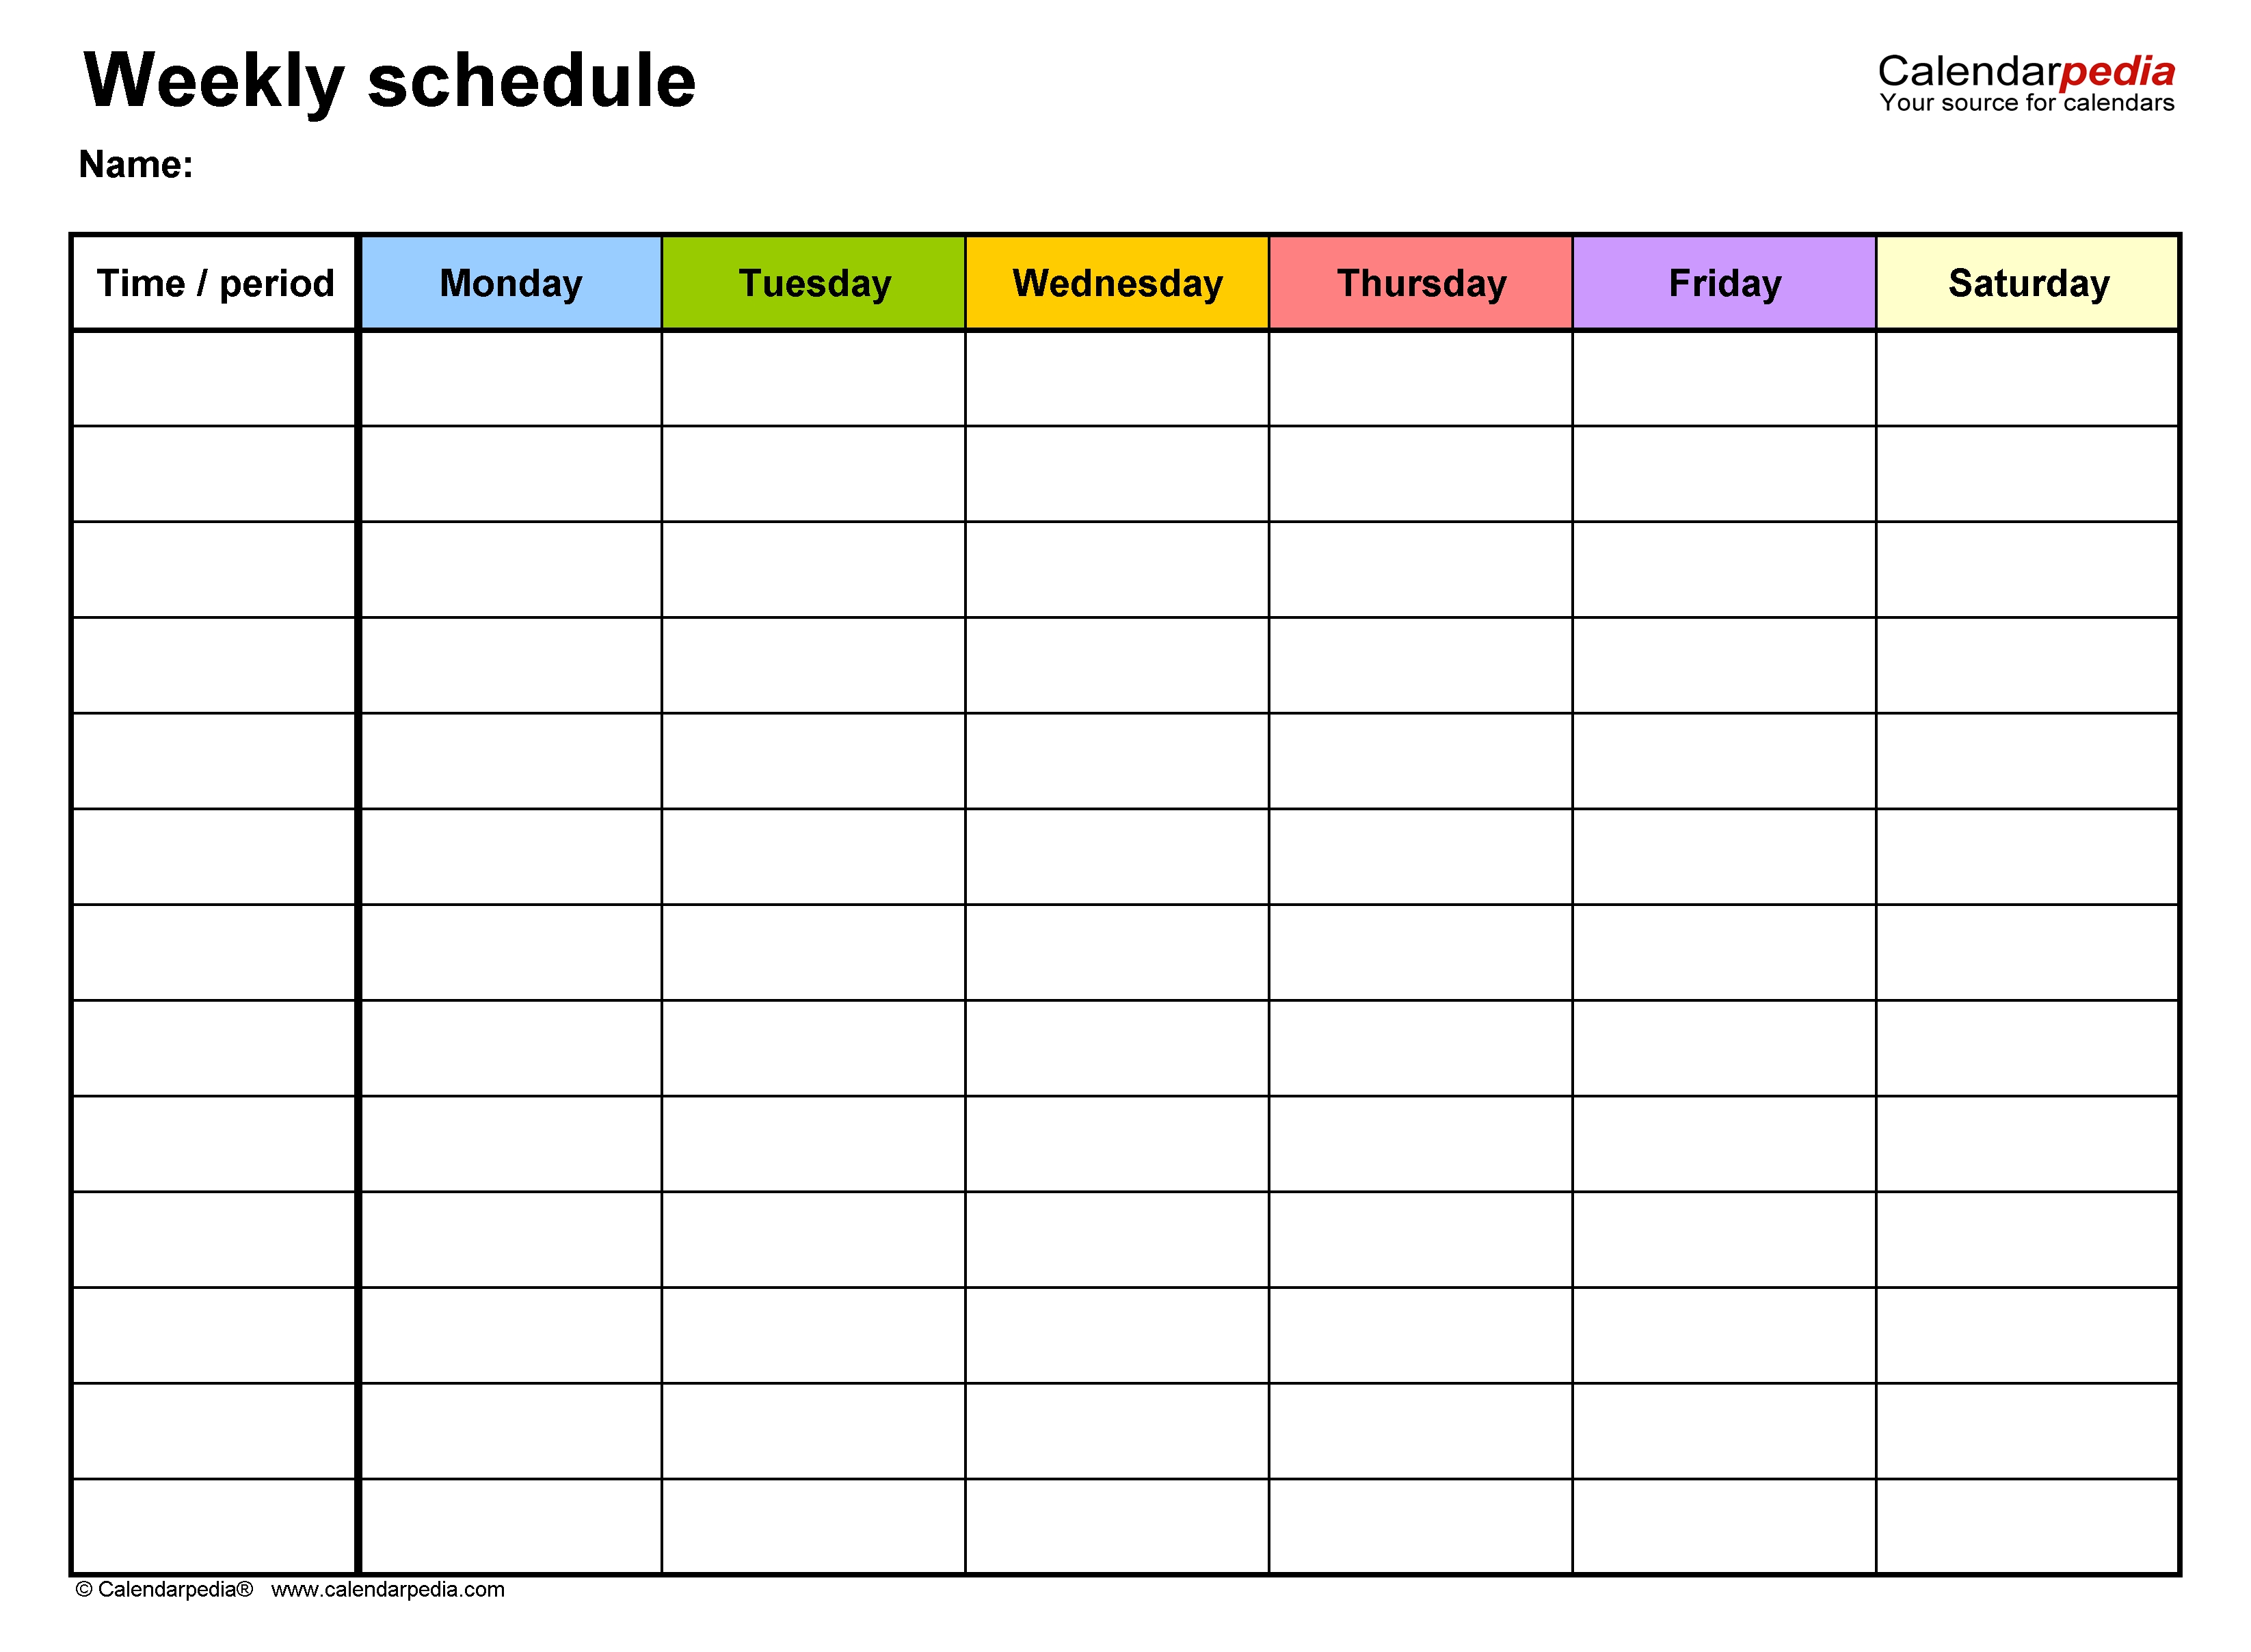 Free Weekly Schedules For Excel - 18 Templates Calendar Template Excel 2007